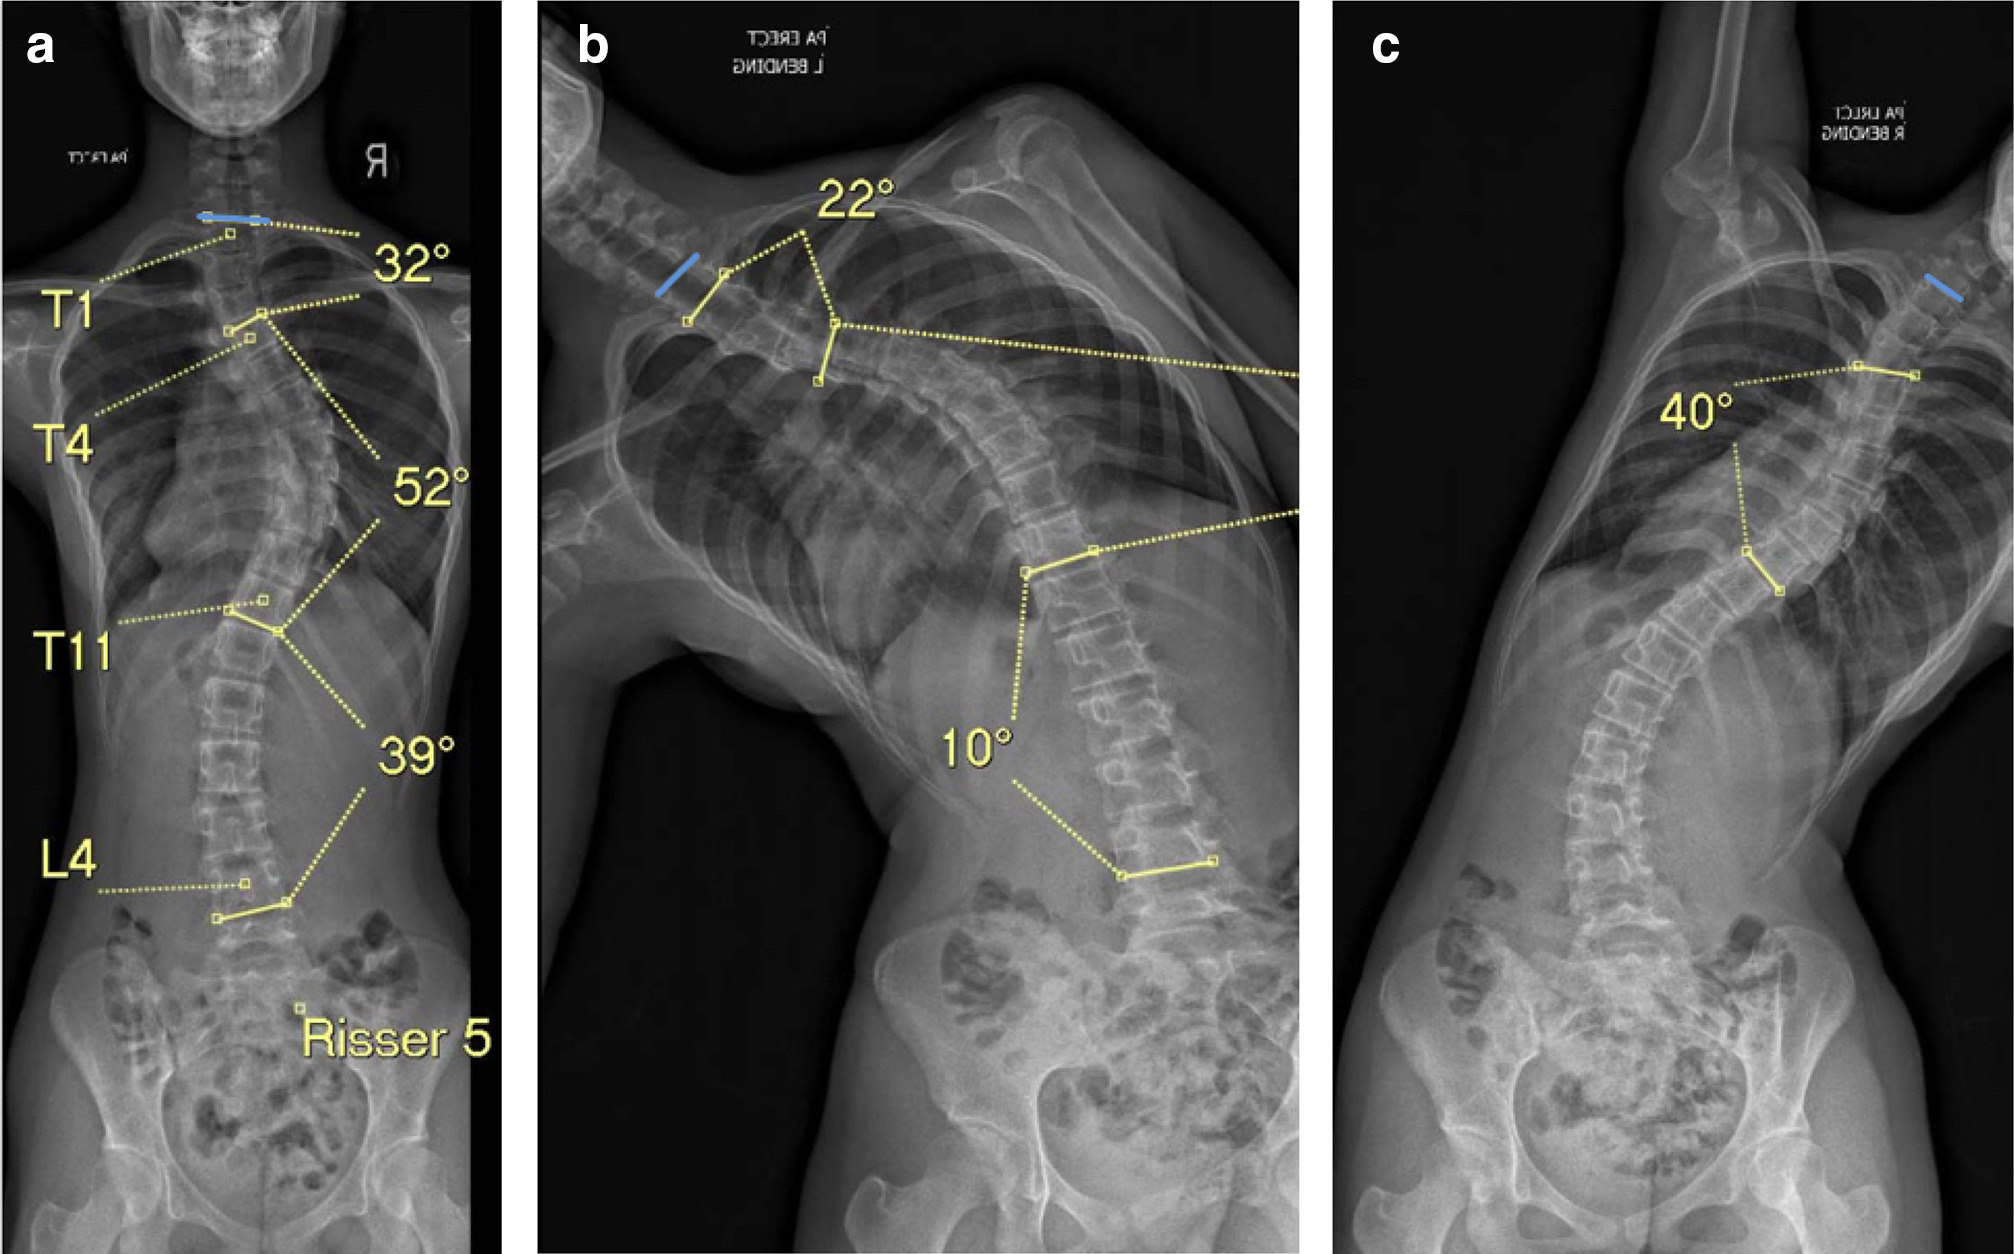 Fig. 2 
            a) Erect radiograph with upper endplate of T1 highlighted (for Survey 3). b) Optimal left bending radiograph. c) Suboptimal right bending radiograph.
          